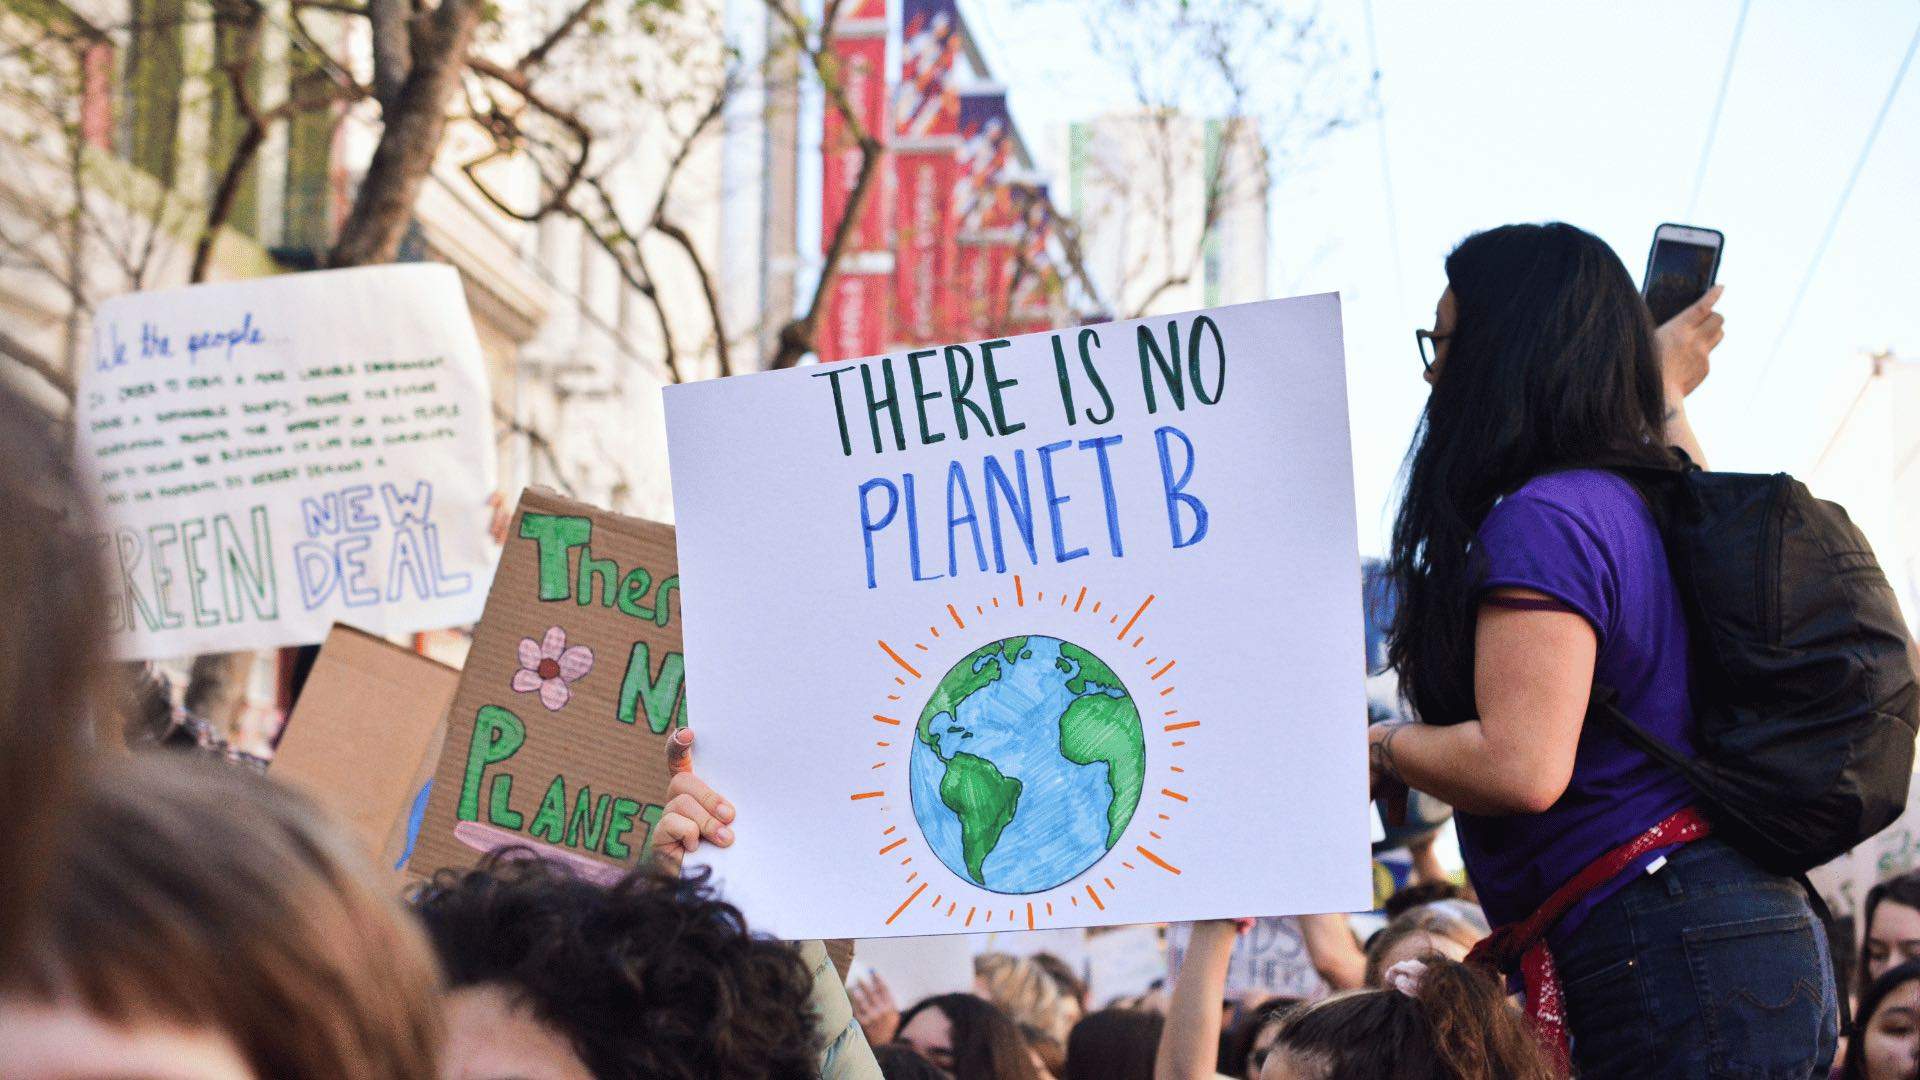 A person holding up a protest sign that reads "There is no Planet B".